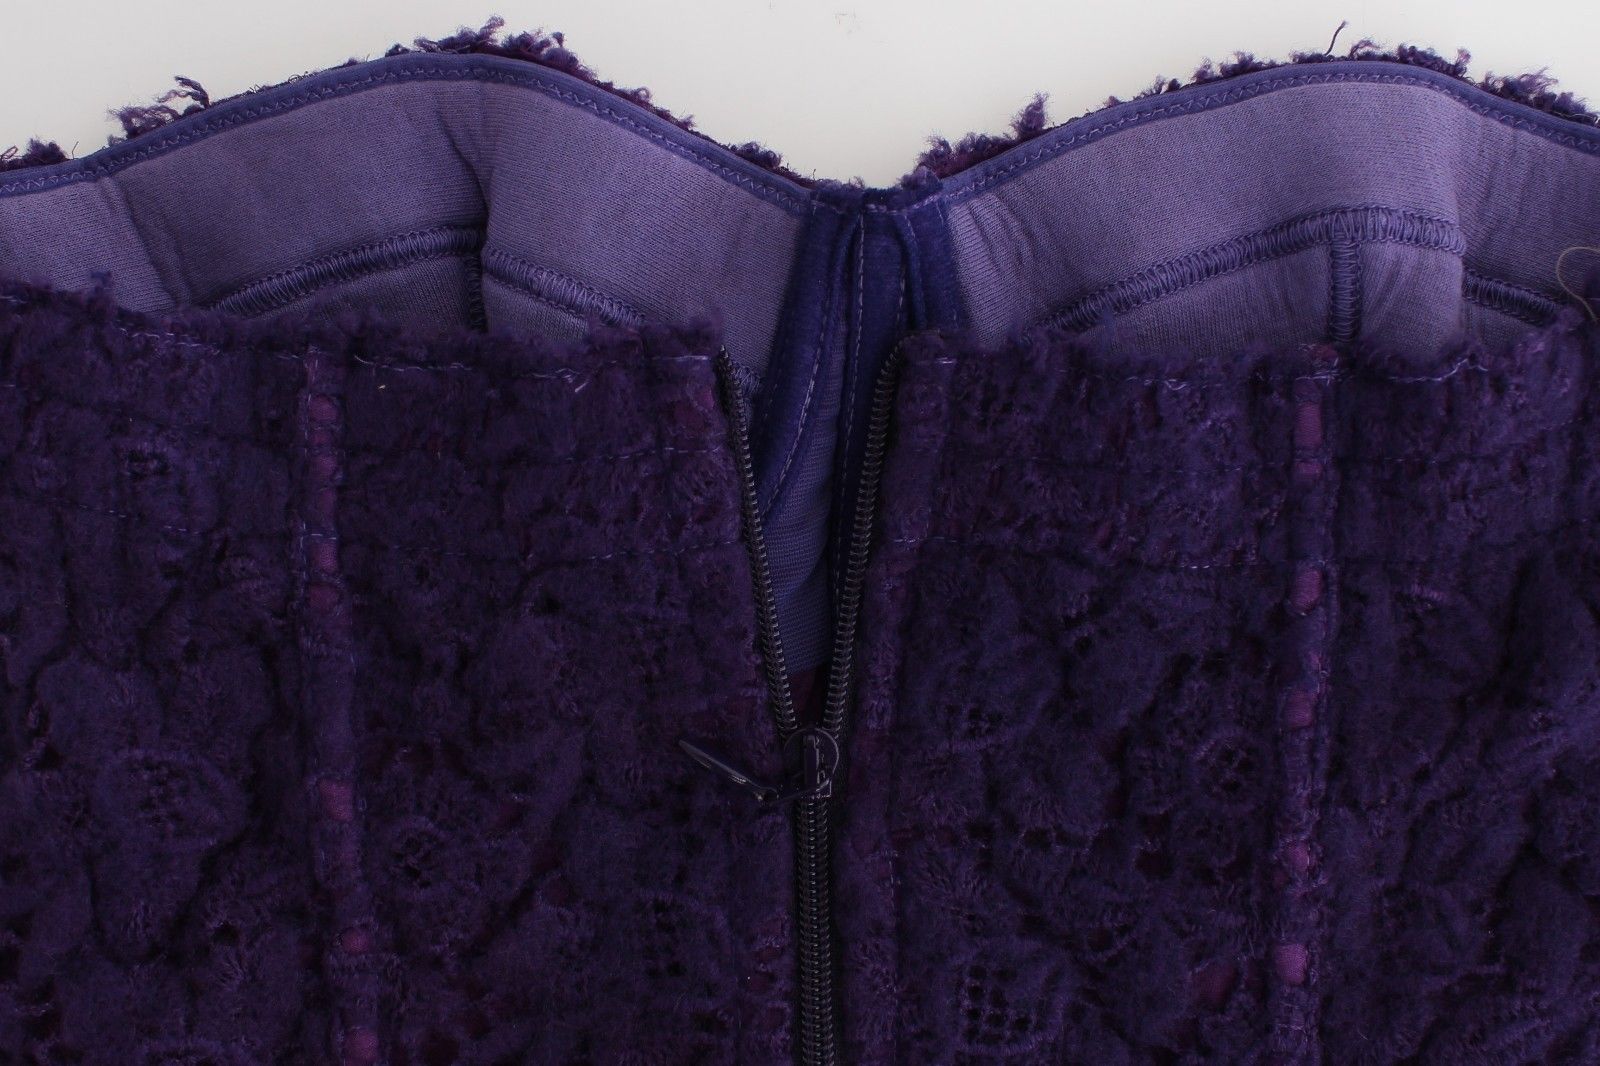 Lingerie Purple Corset Bustier Top Floral Lace designed by Ermanno Scervino available from Moon Behind The Hill's Women's Clothing range